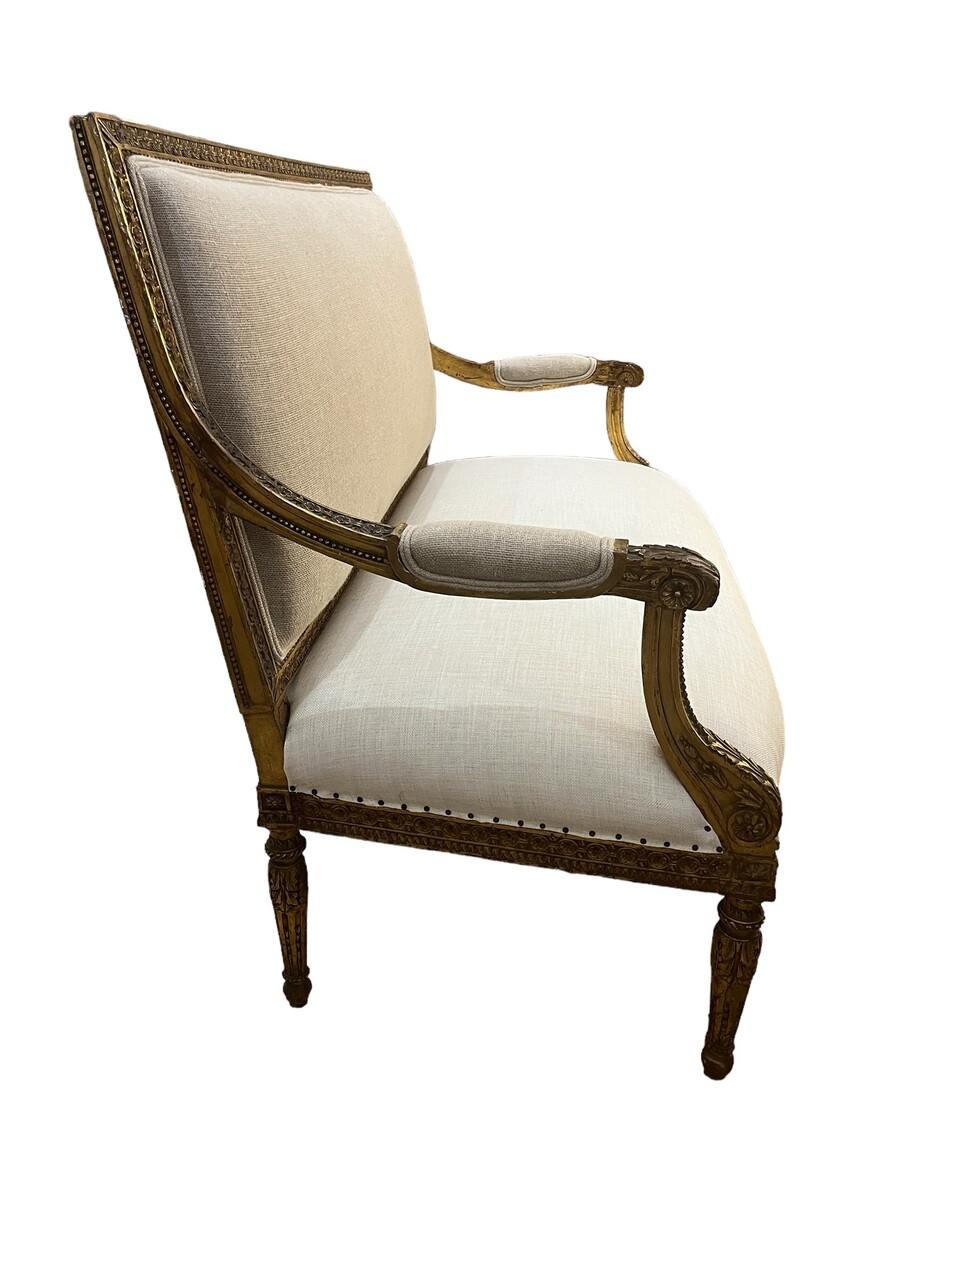 Louis XVI Style Giltwood Settee In Good Condition For Sale In Houston, TX